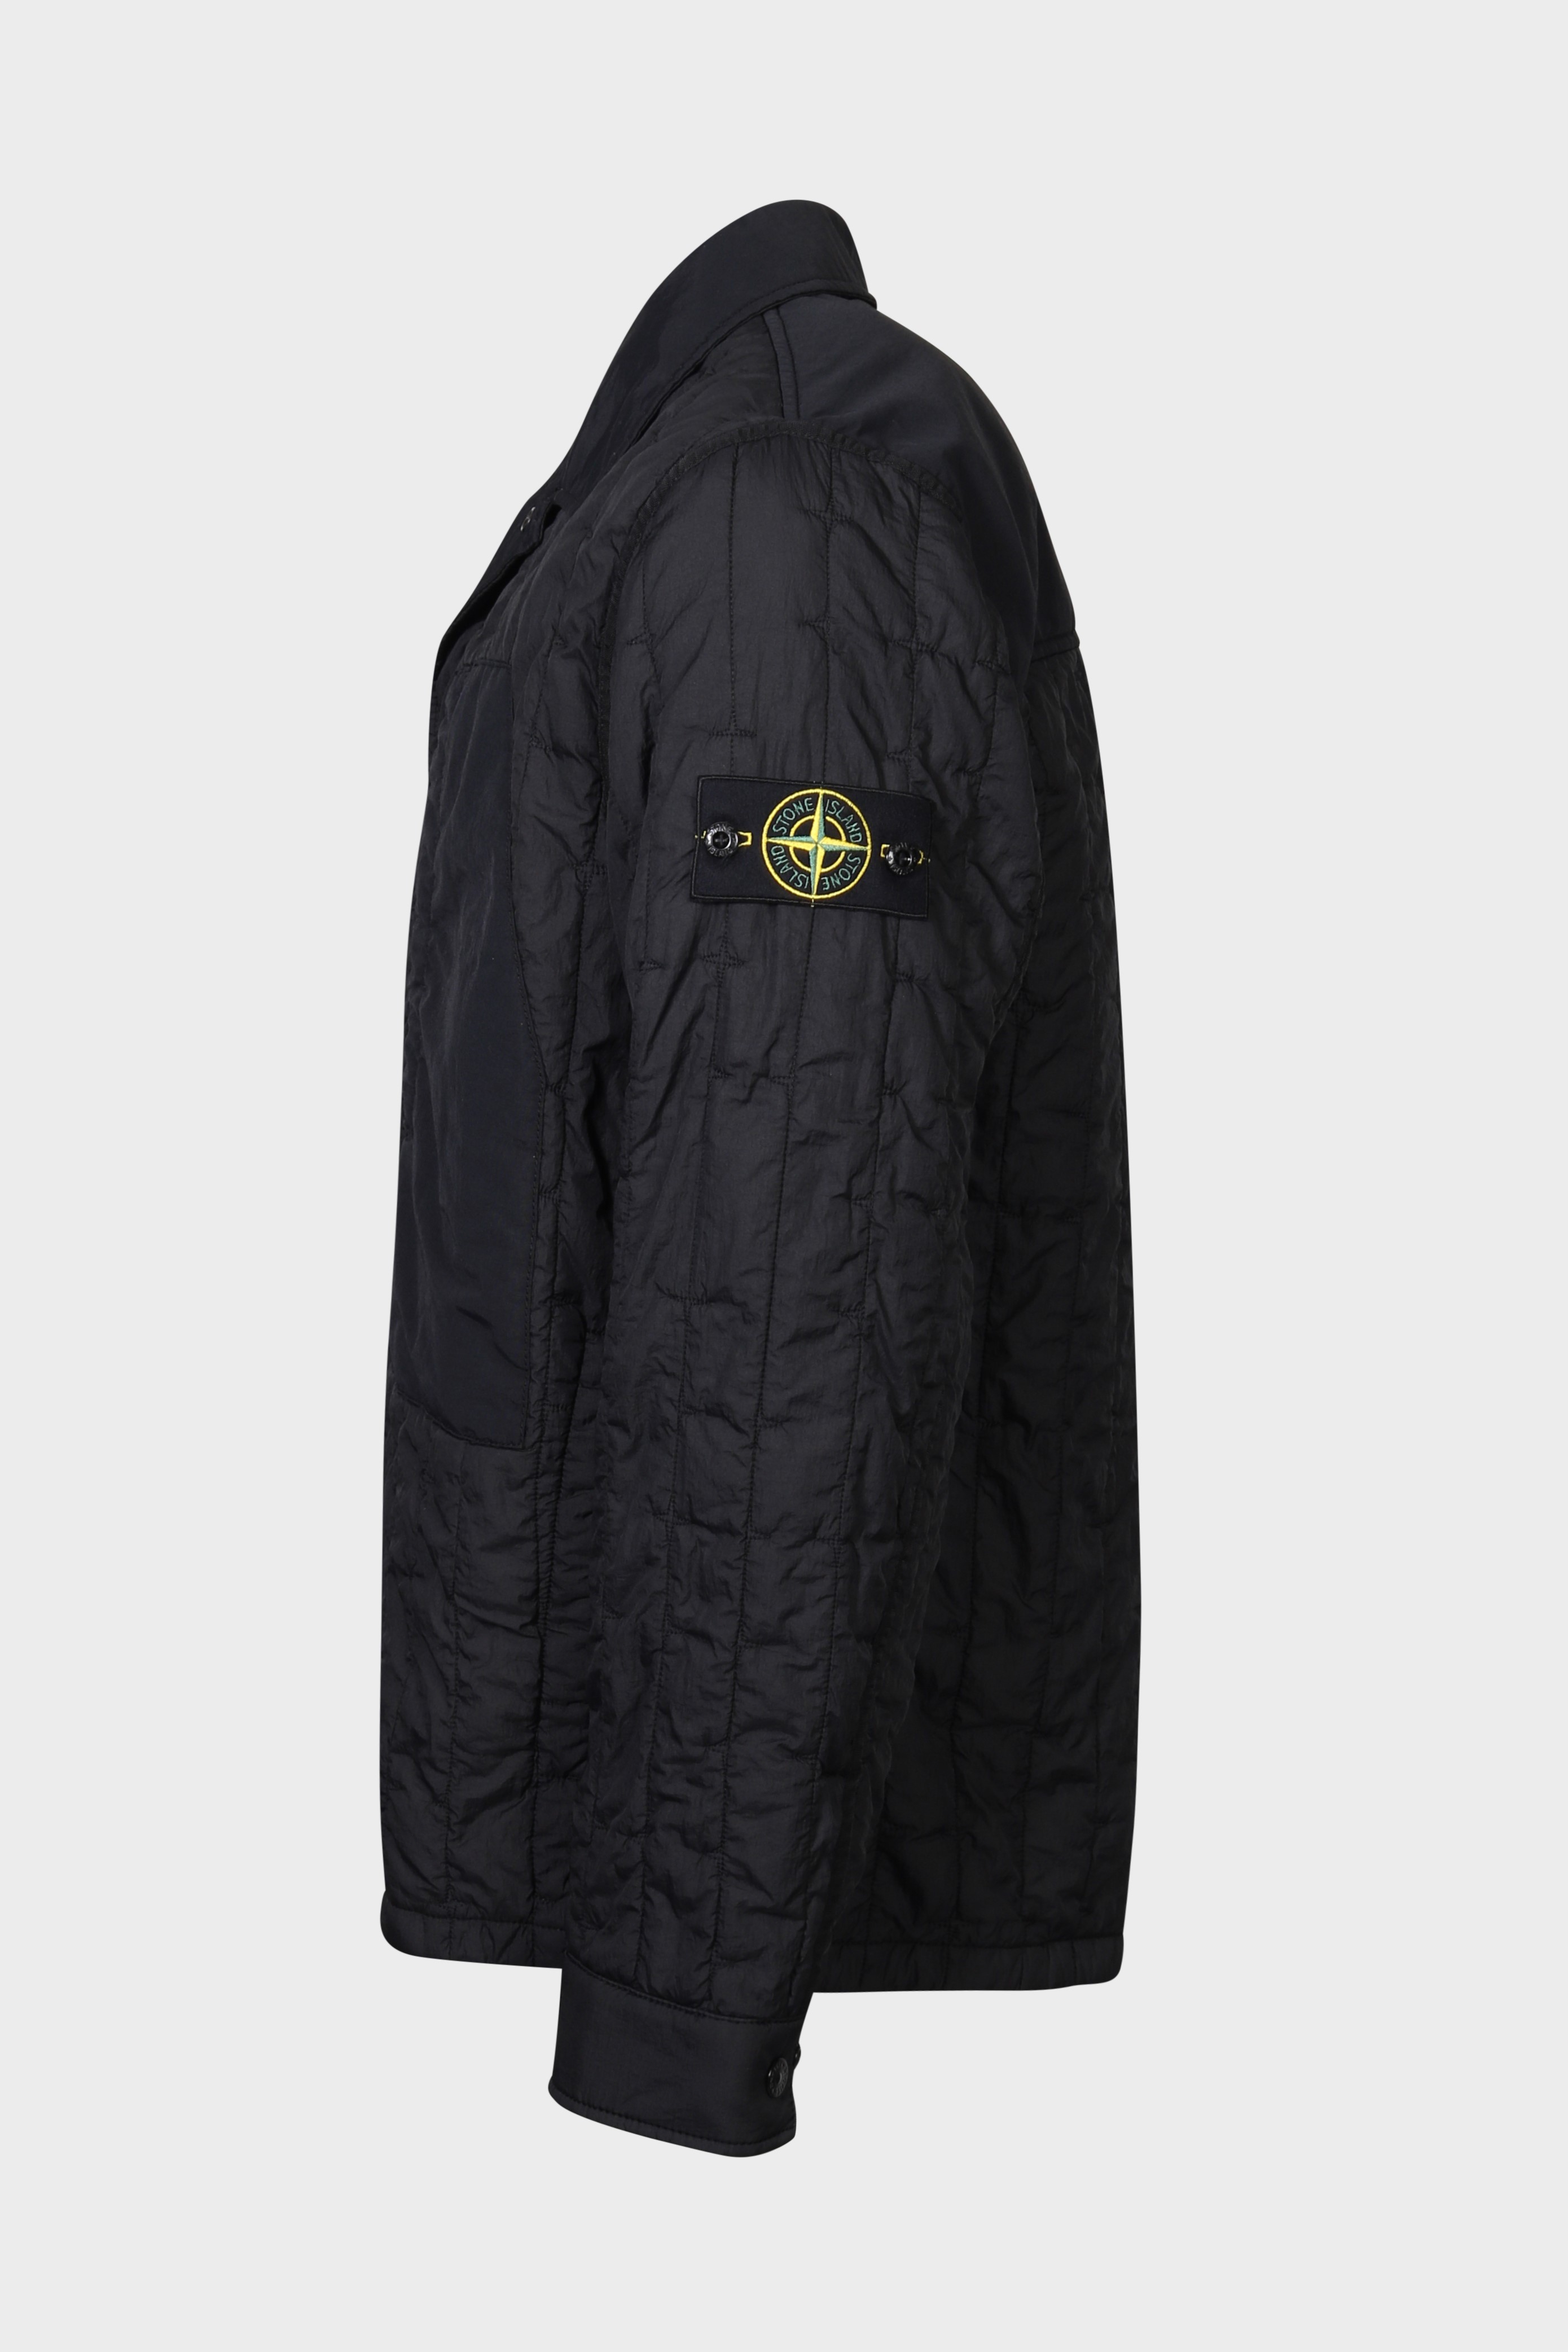 STONE ISLAND Quilted Nylon Stella Jacket in Black S